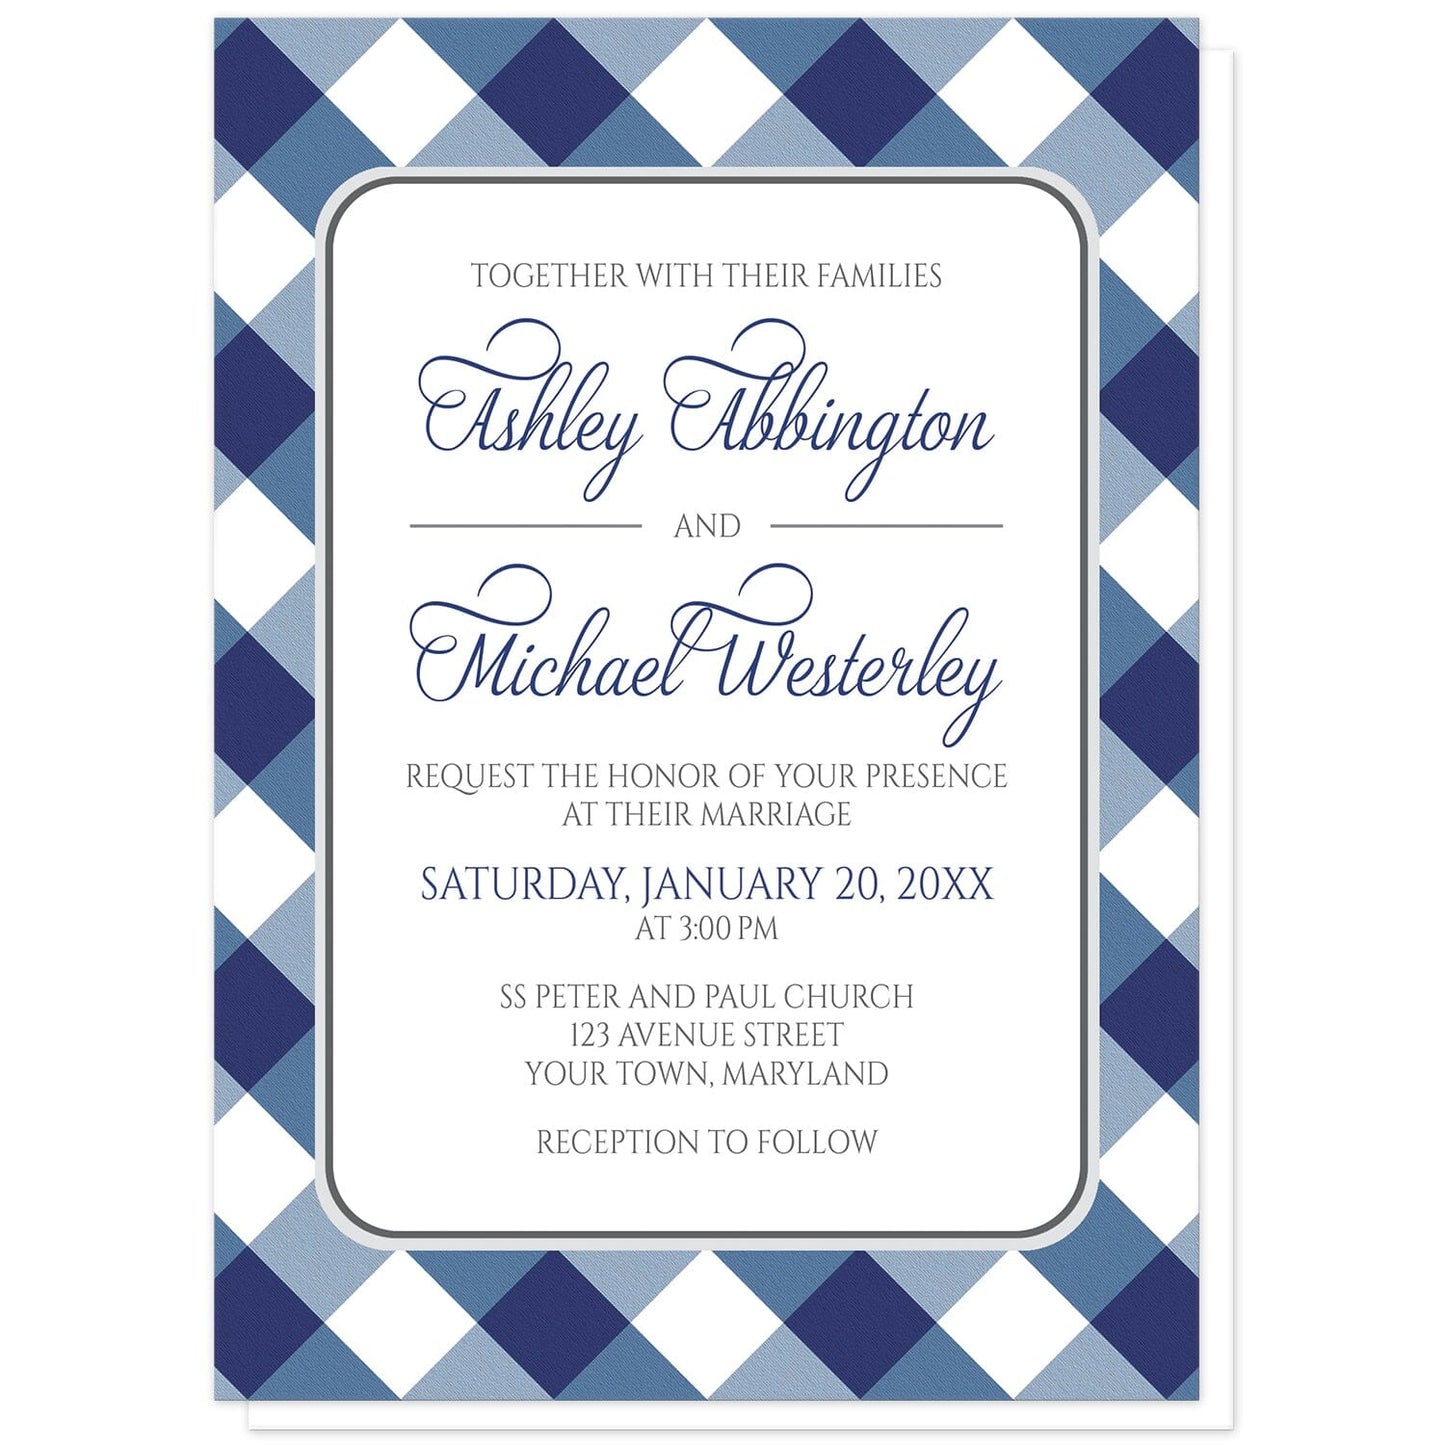 Navy Blue Gingham Wedding Invitations at Artistically Invited. Navy blue gingham wedding invitations with your personalized marriage celebration details custom printed in blue and gray inside a white rectangular area outlined in gray. The background design is a diagonal navy blue and white gingham pattern. 